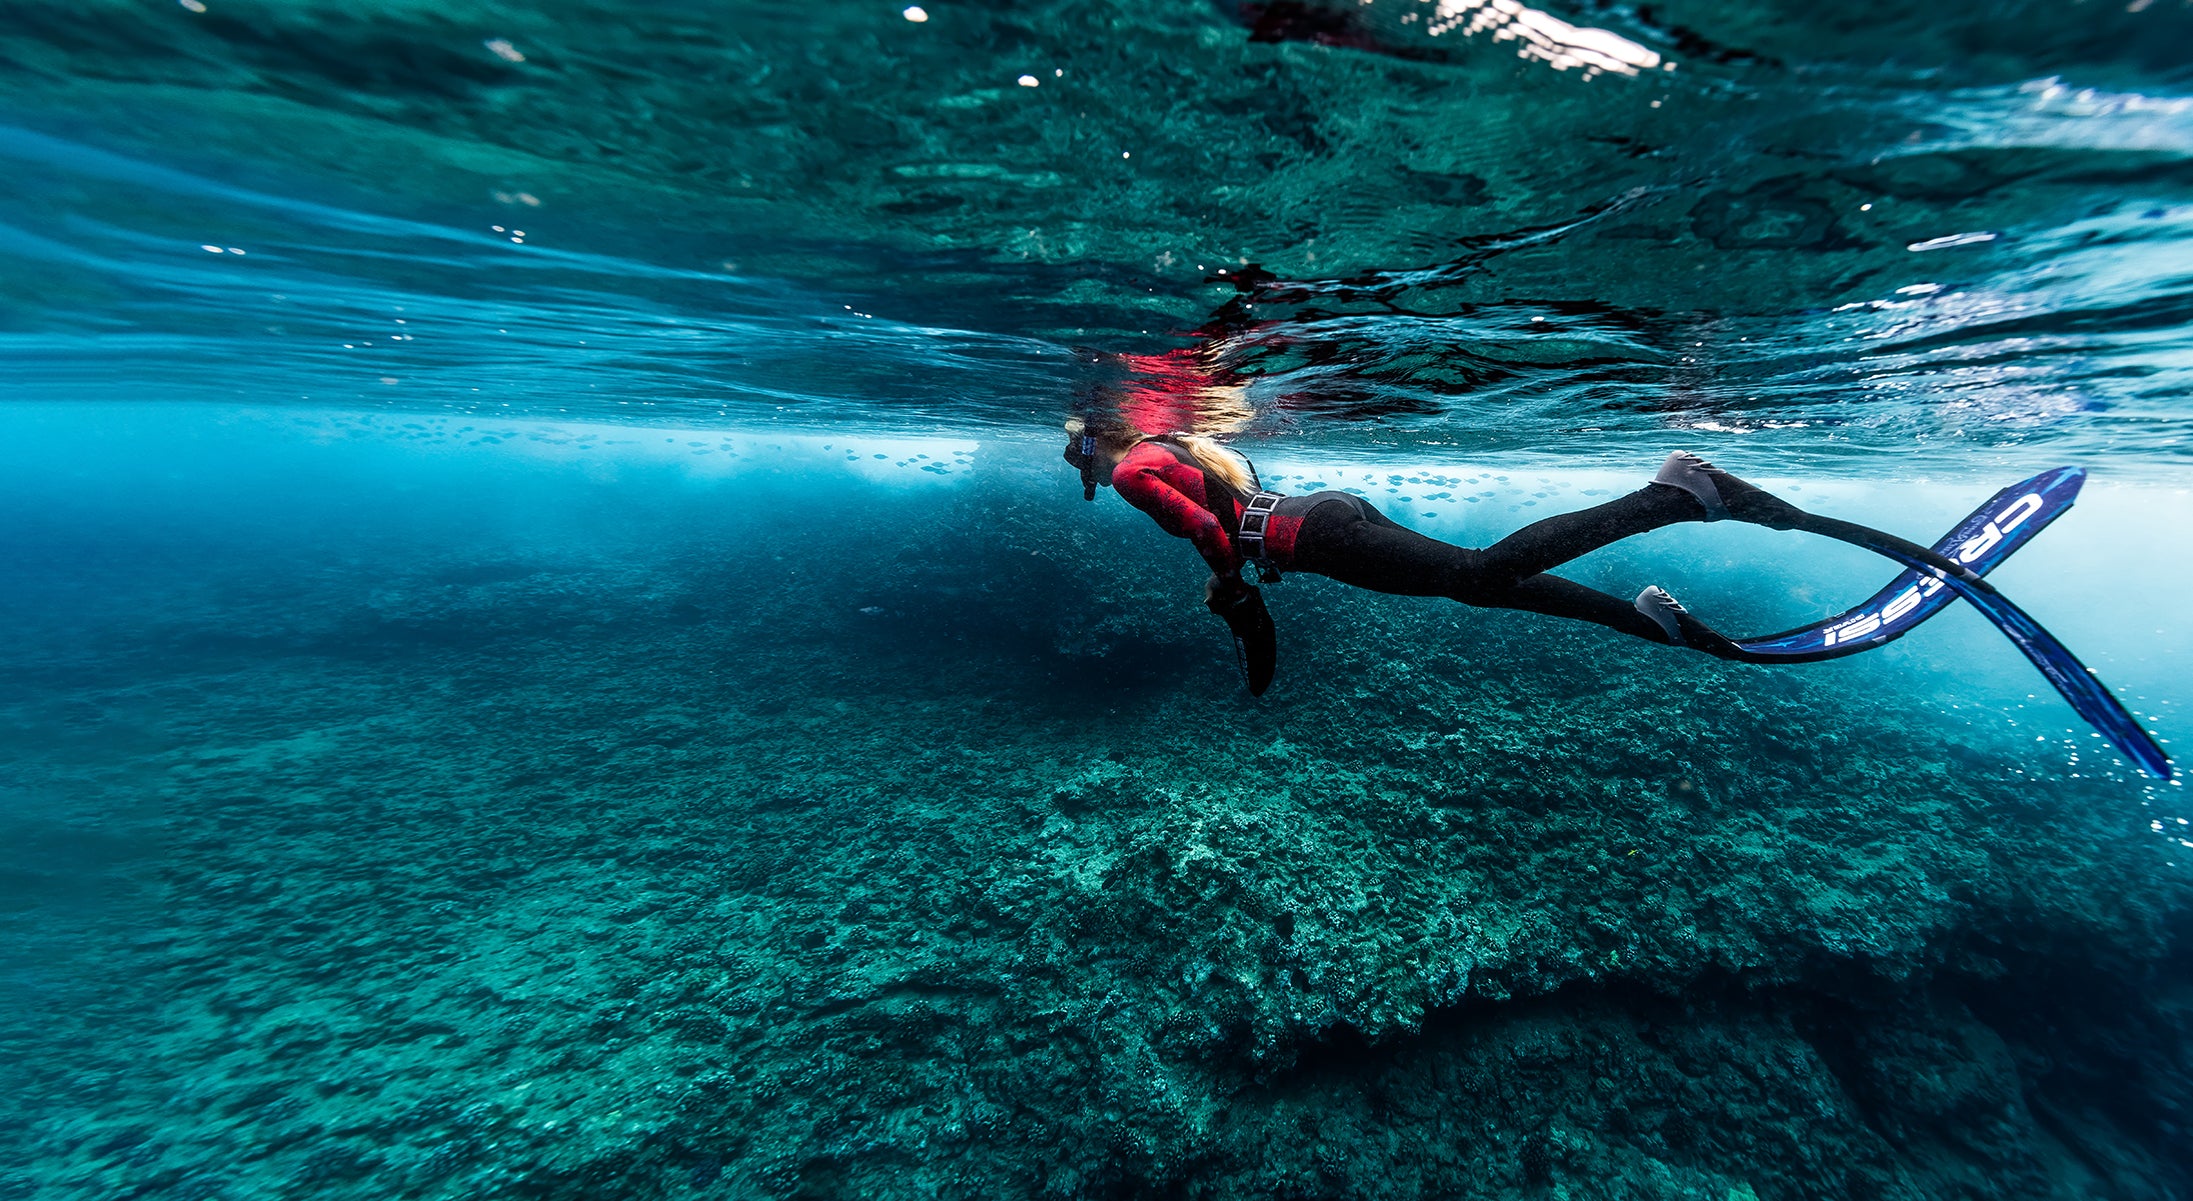 Shop Surfing and Dive Wetsuits and Accessories for Men, Women